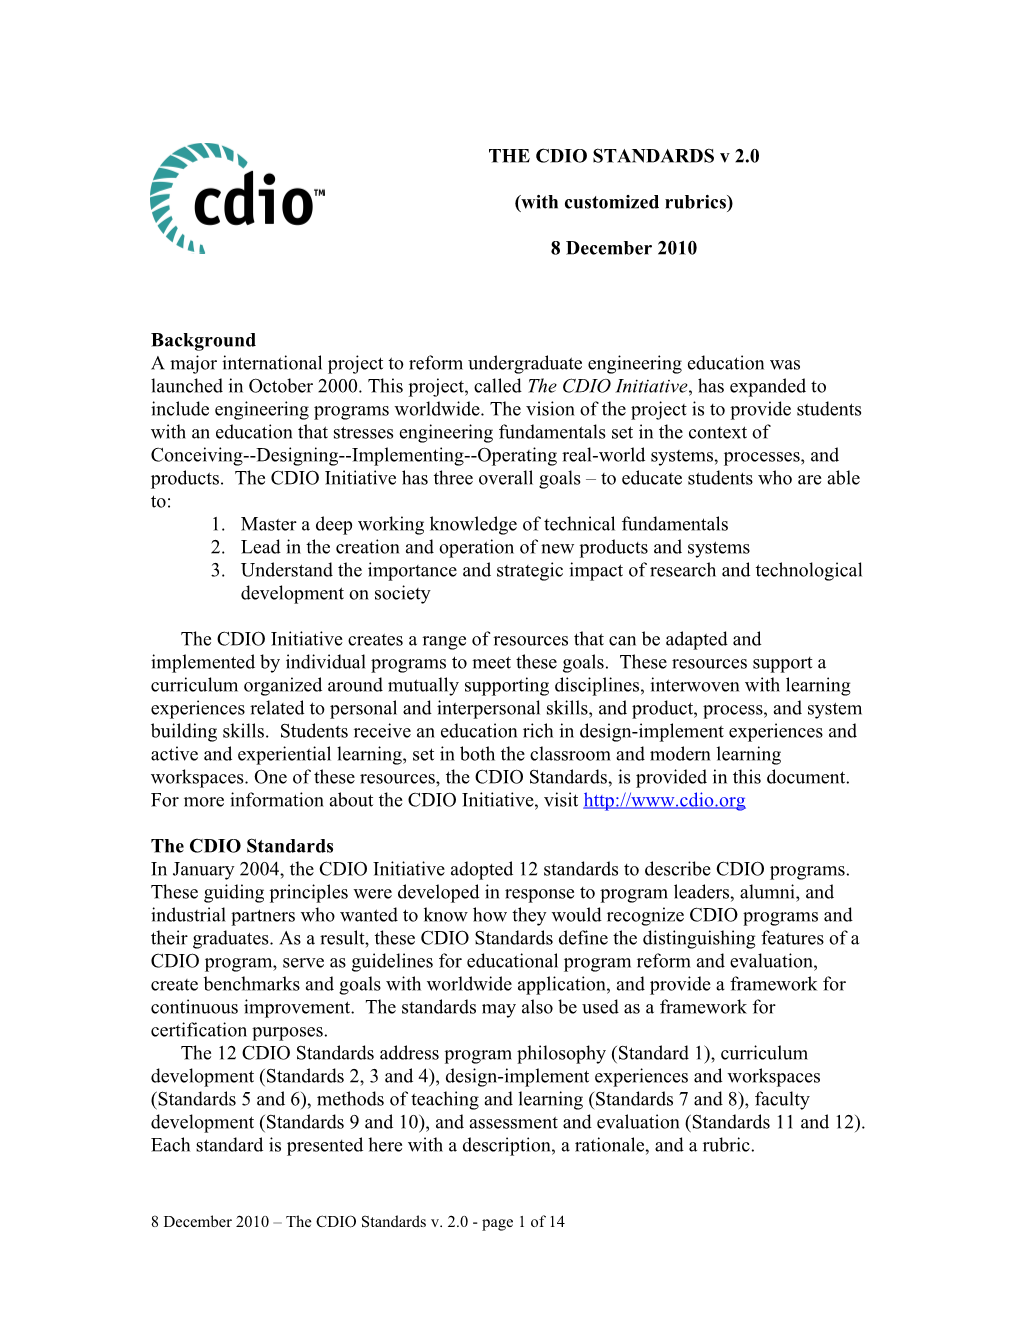 The Cdio Standards